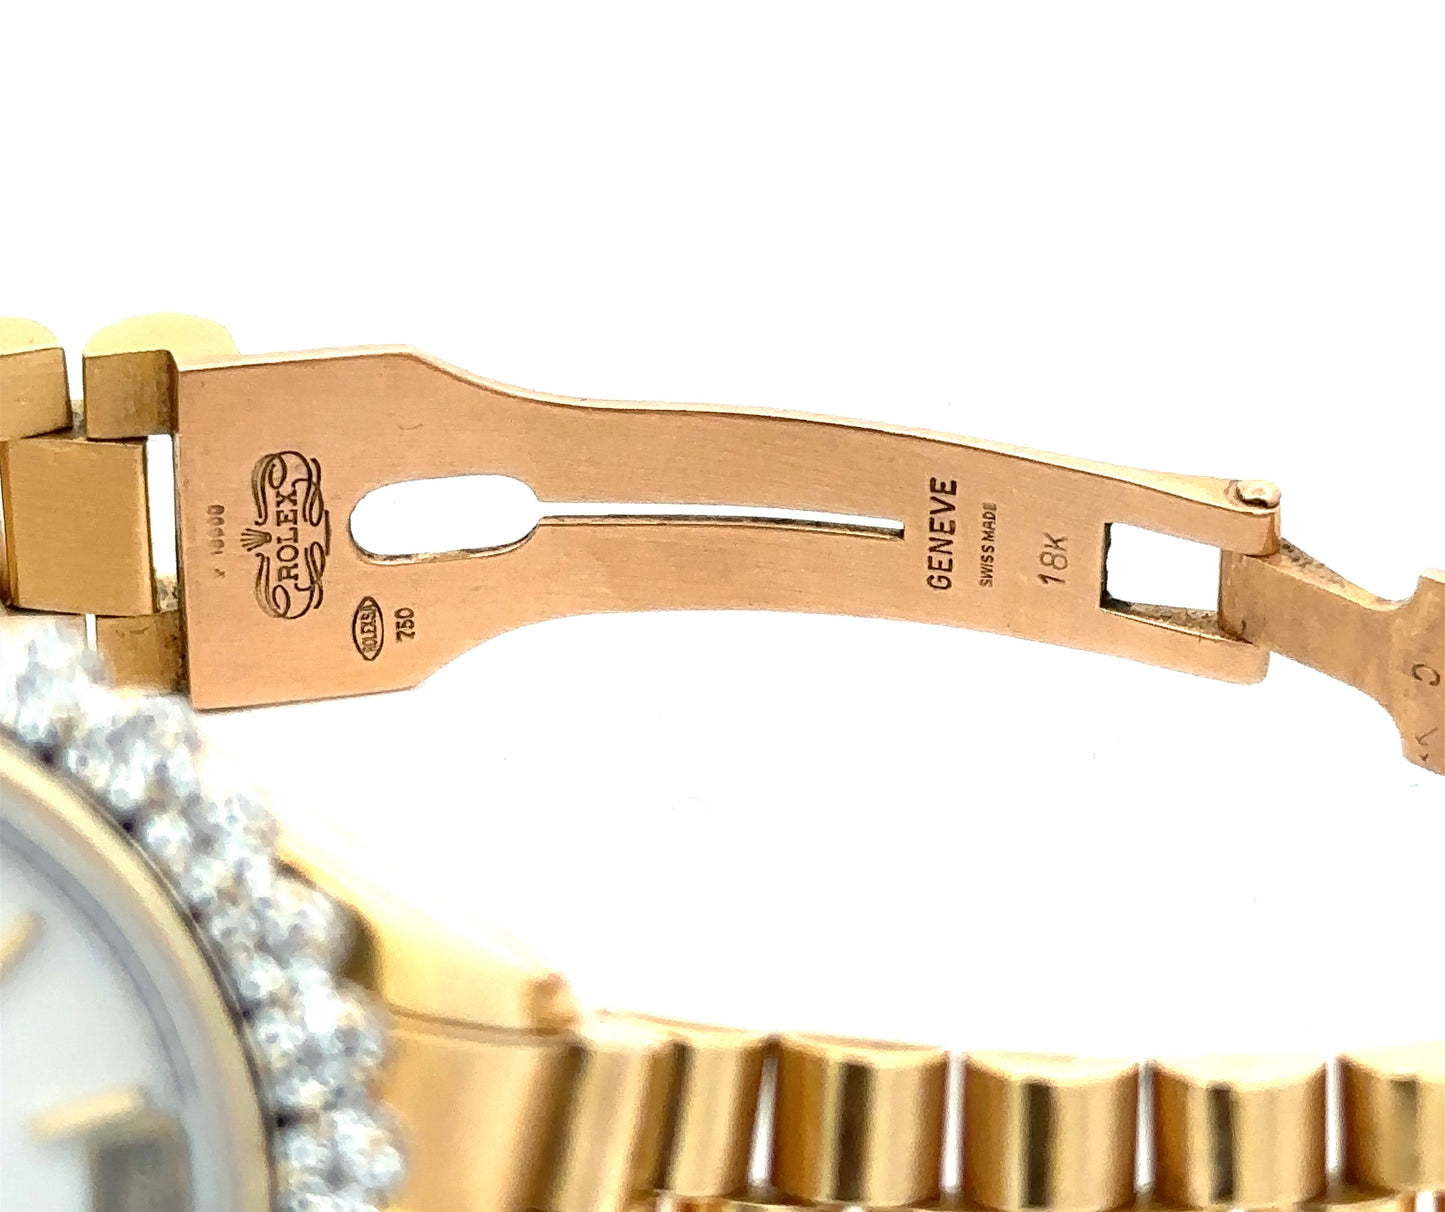 Open clasp with Rolex signature, "Geneve" swiss made, 18K stamp